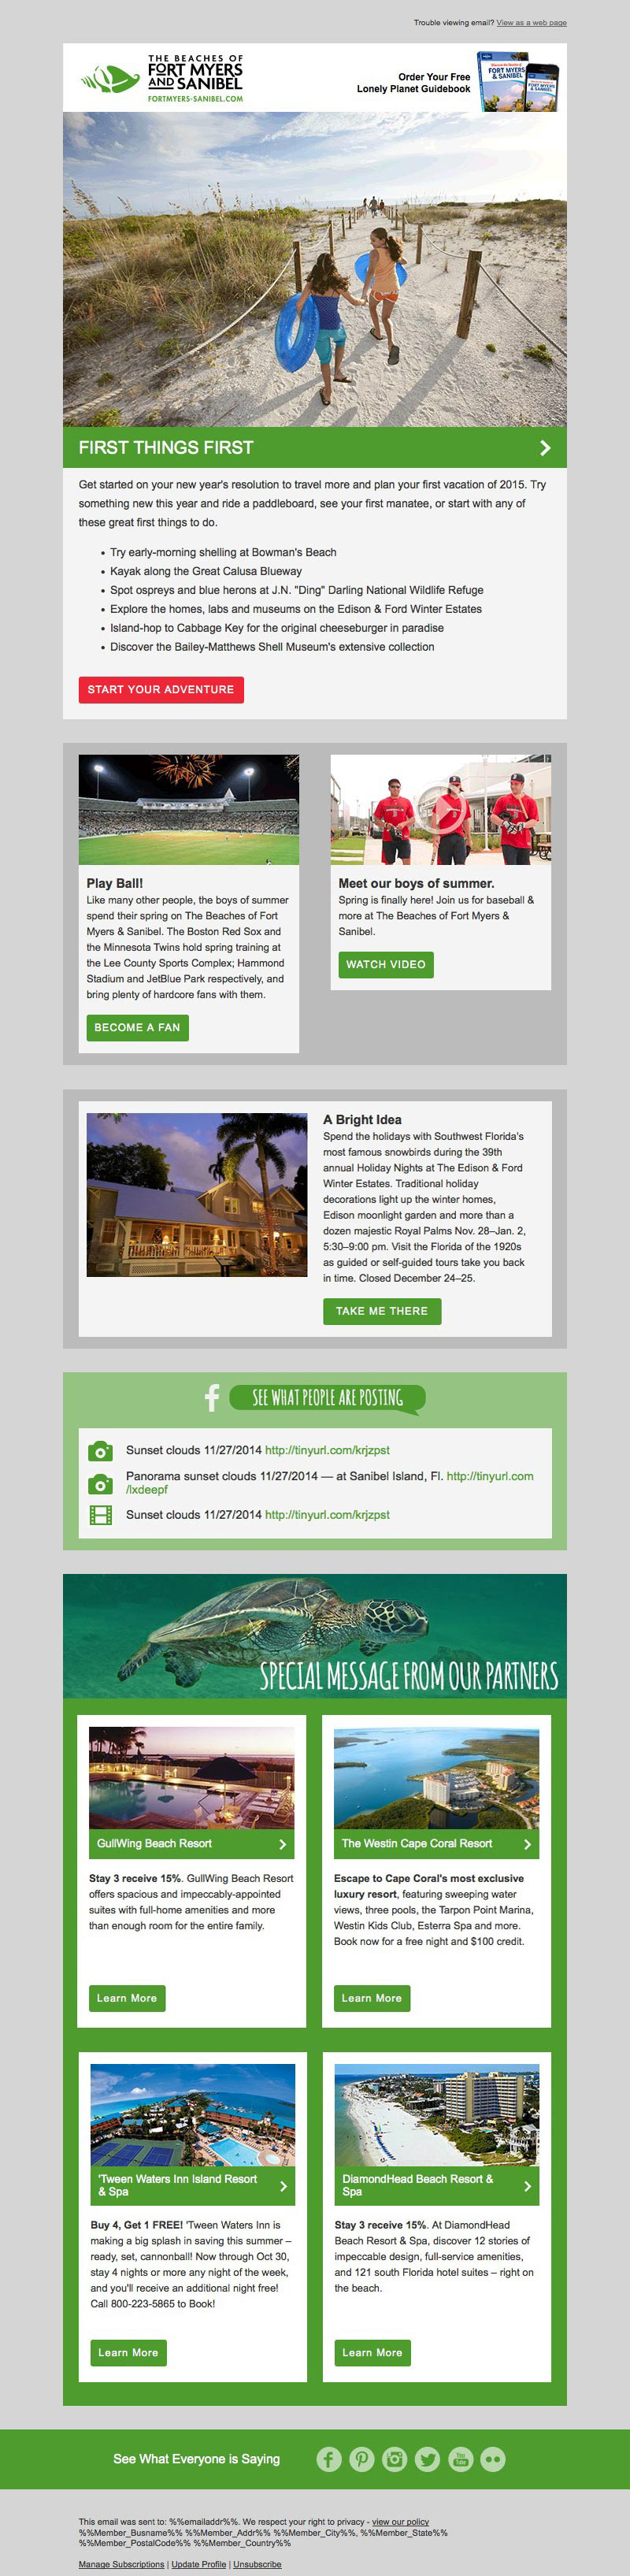 Email Design Email page layout